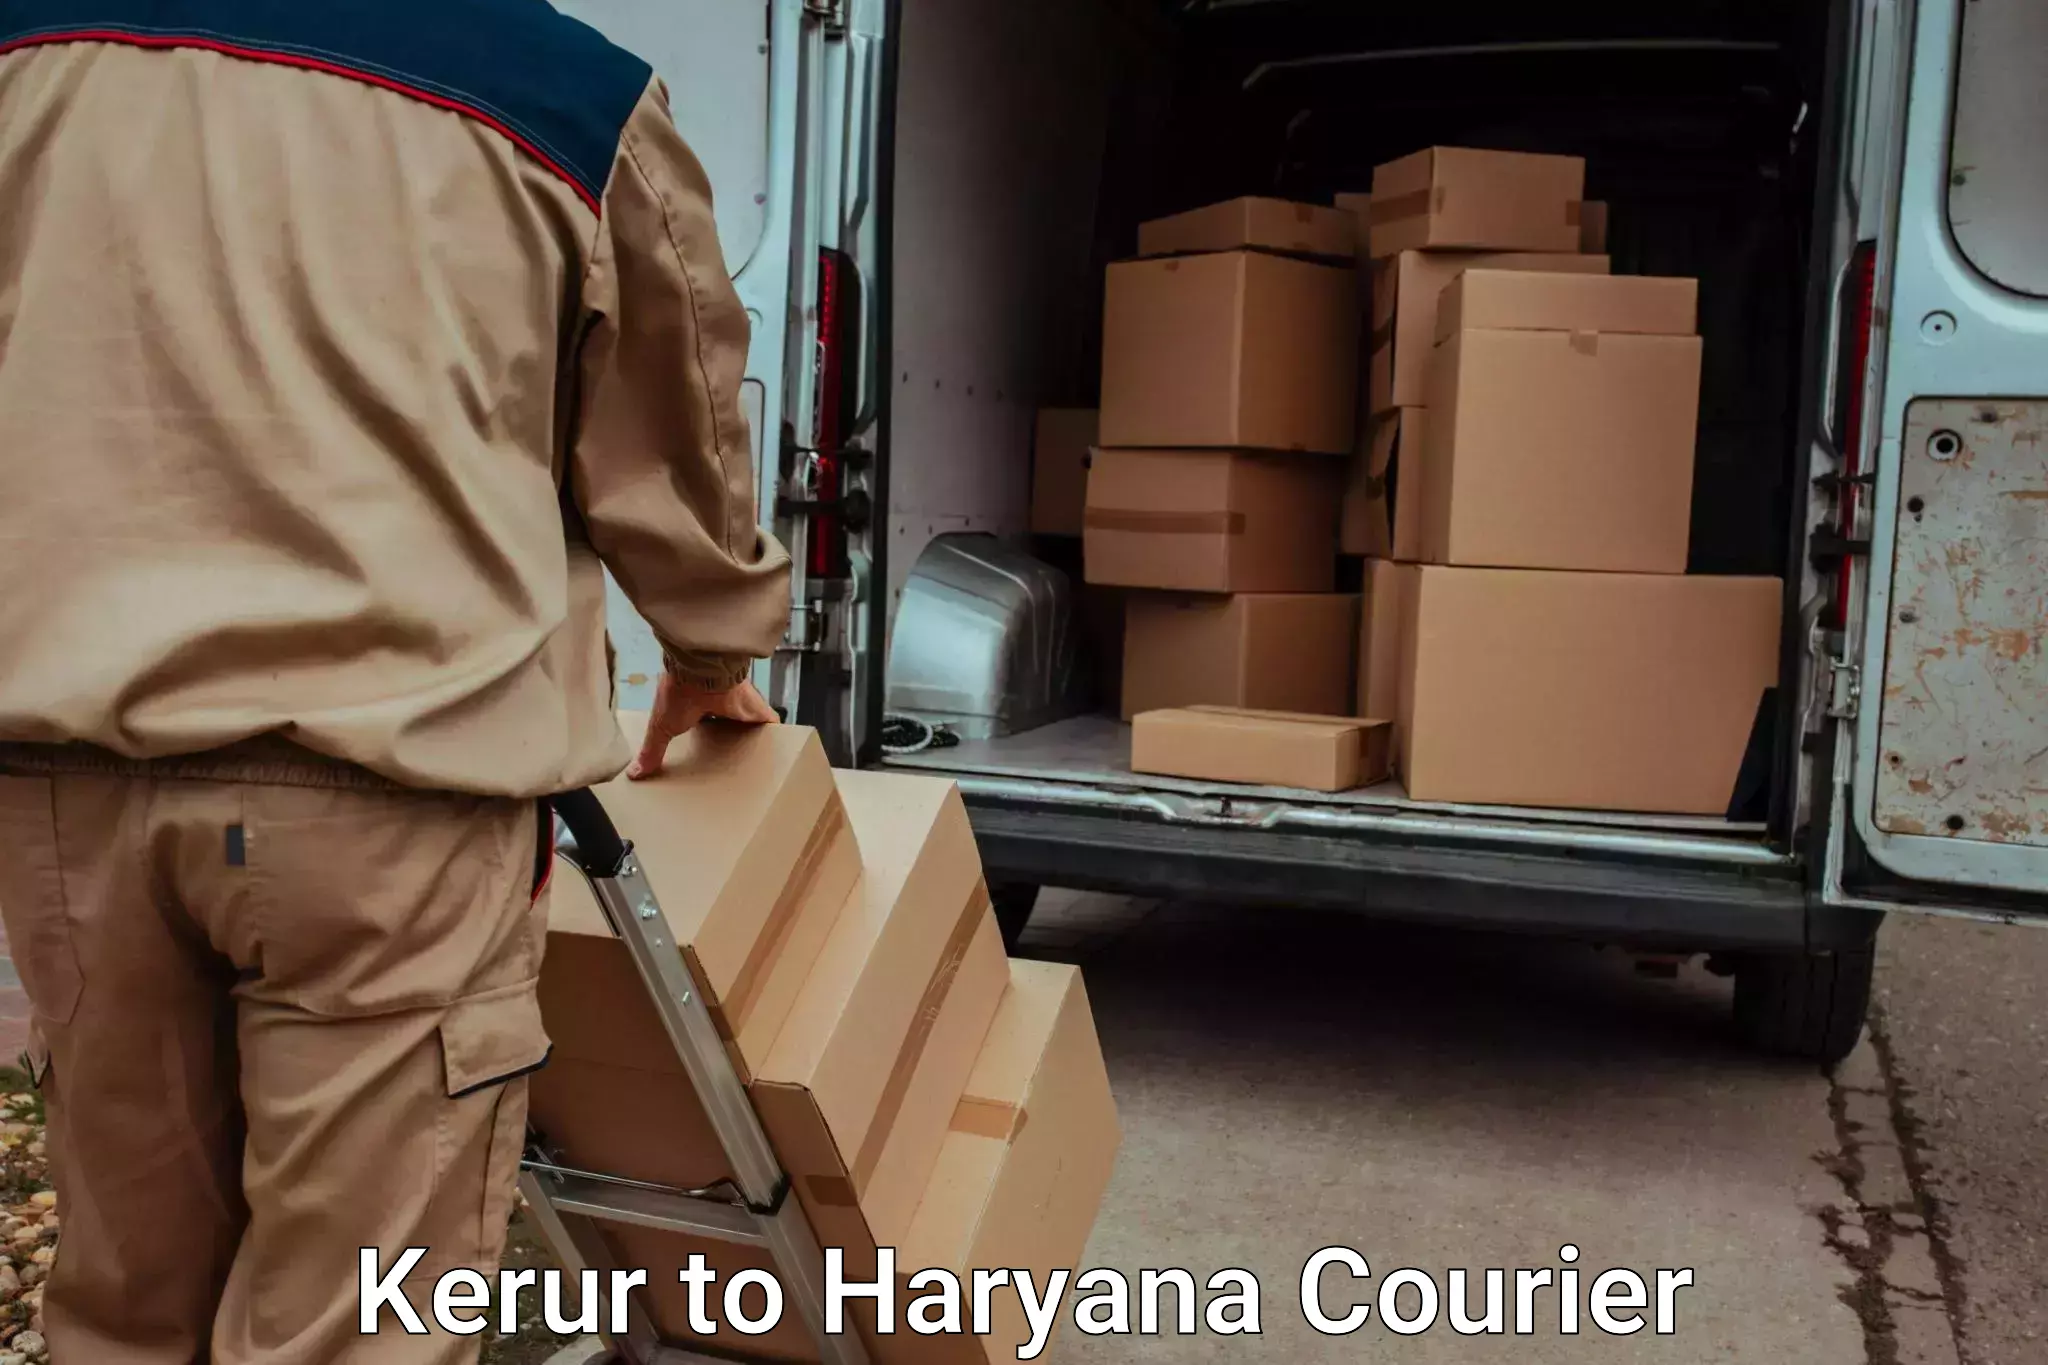 Personal luggage delivery in Kerur to Gurgaon